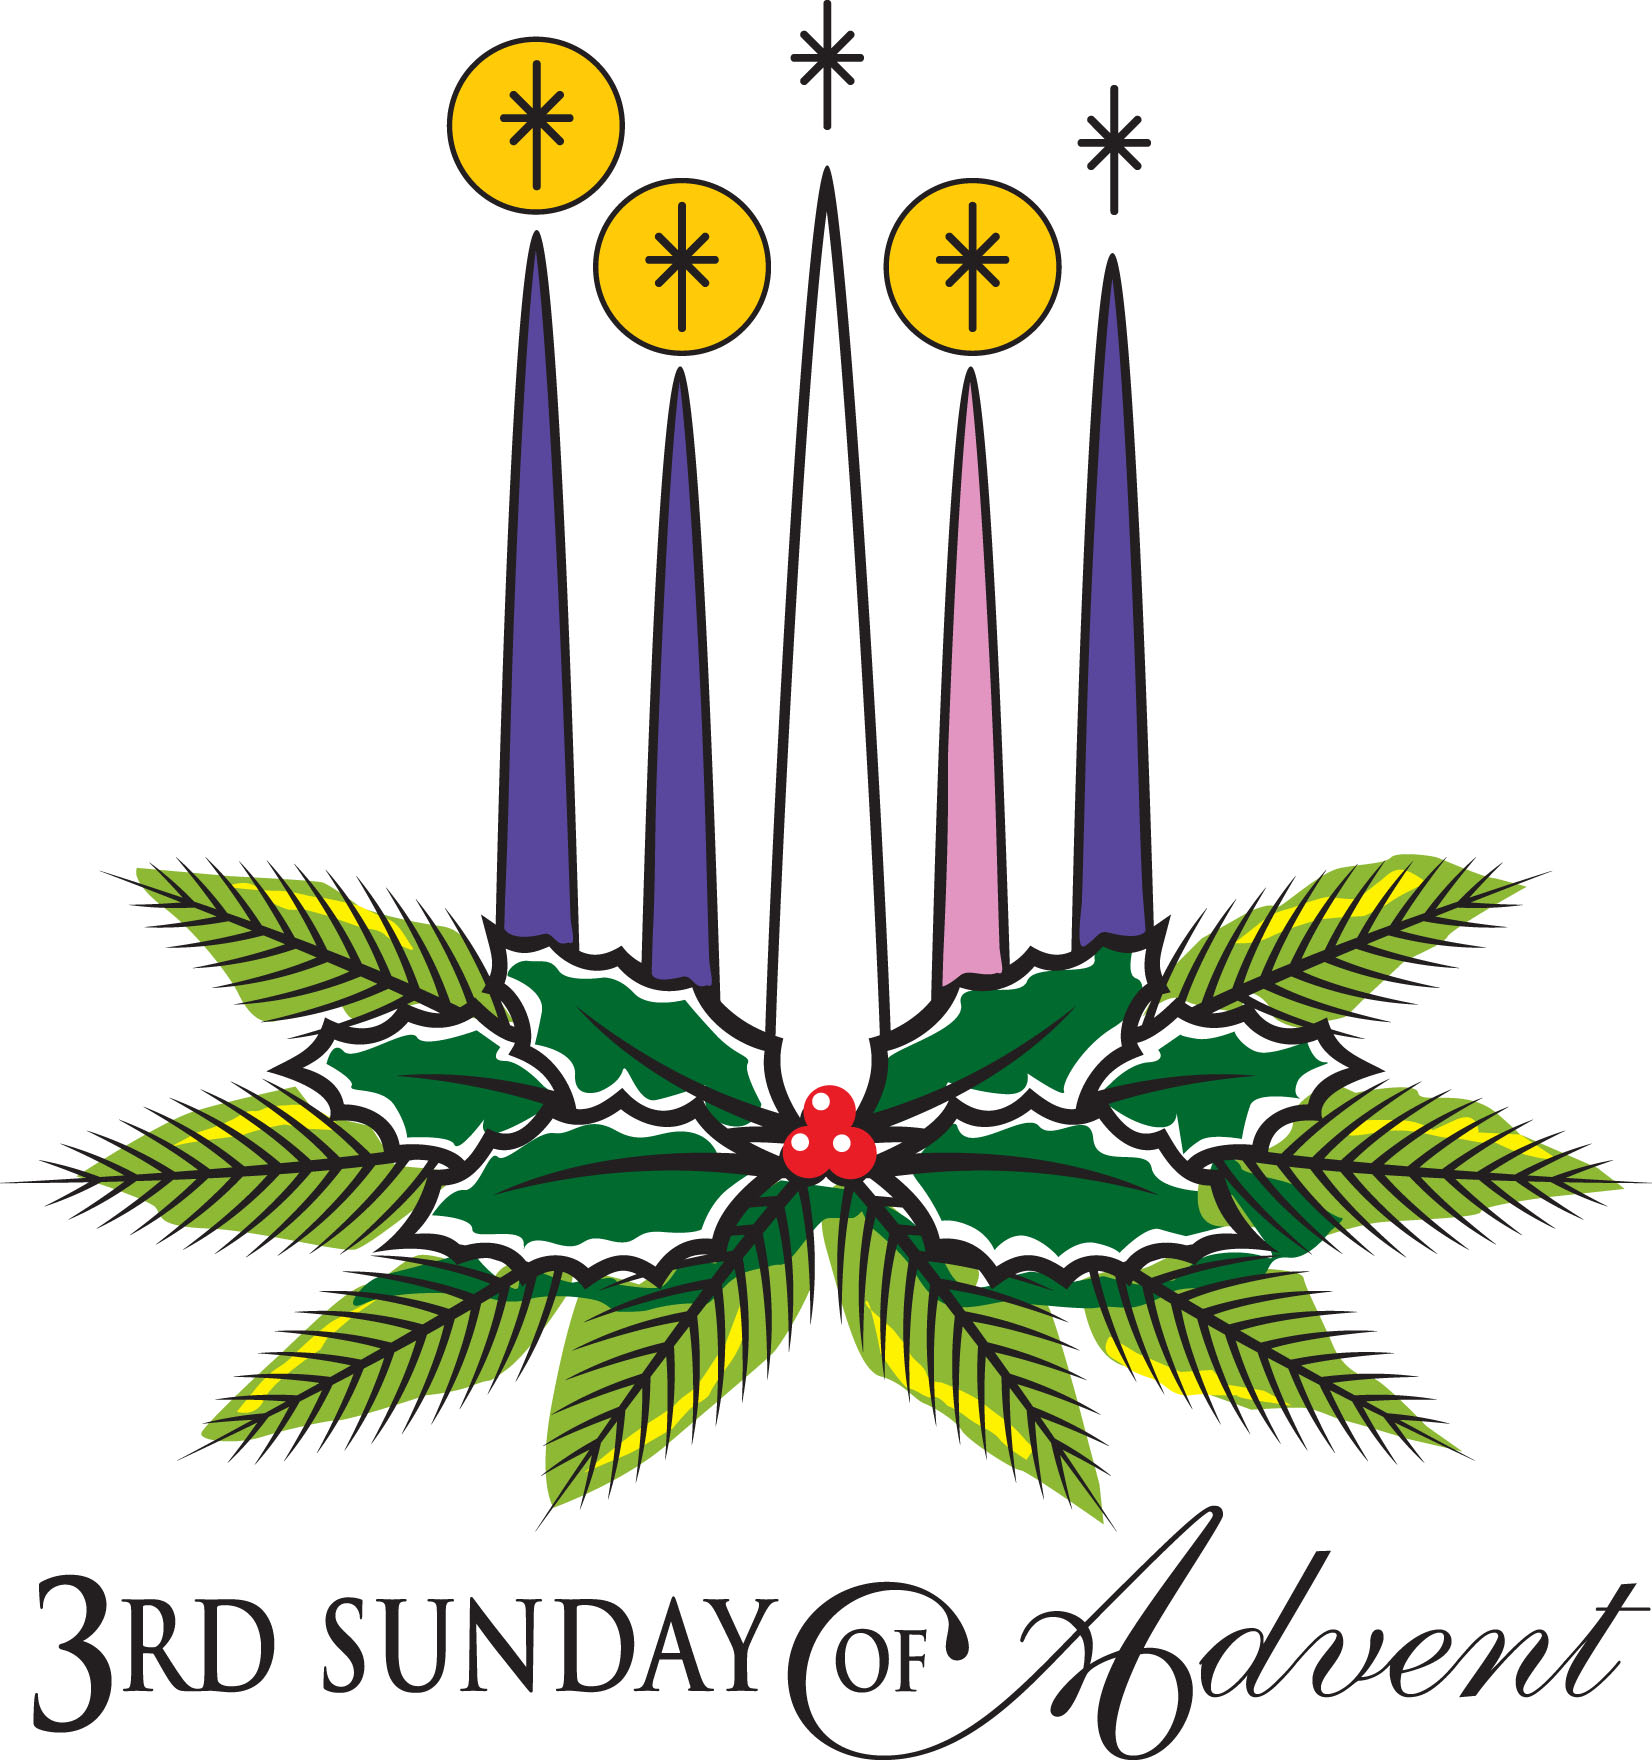 Sunday December 15 2013 The Third Sunday In Advent